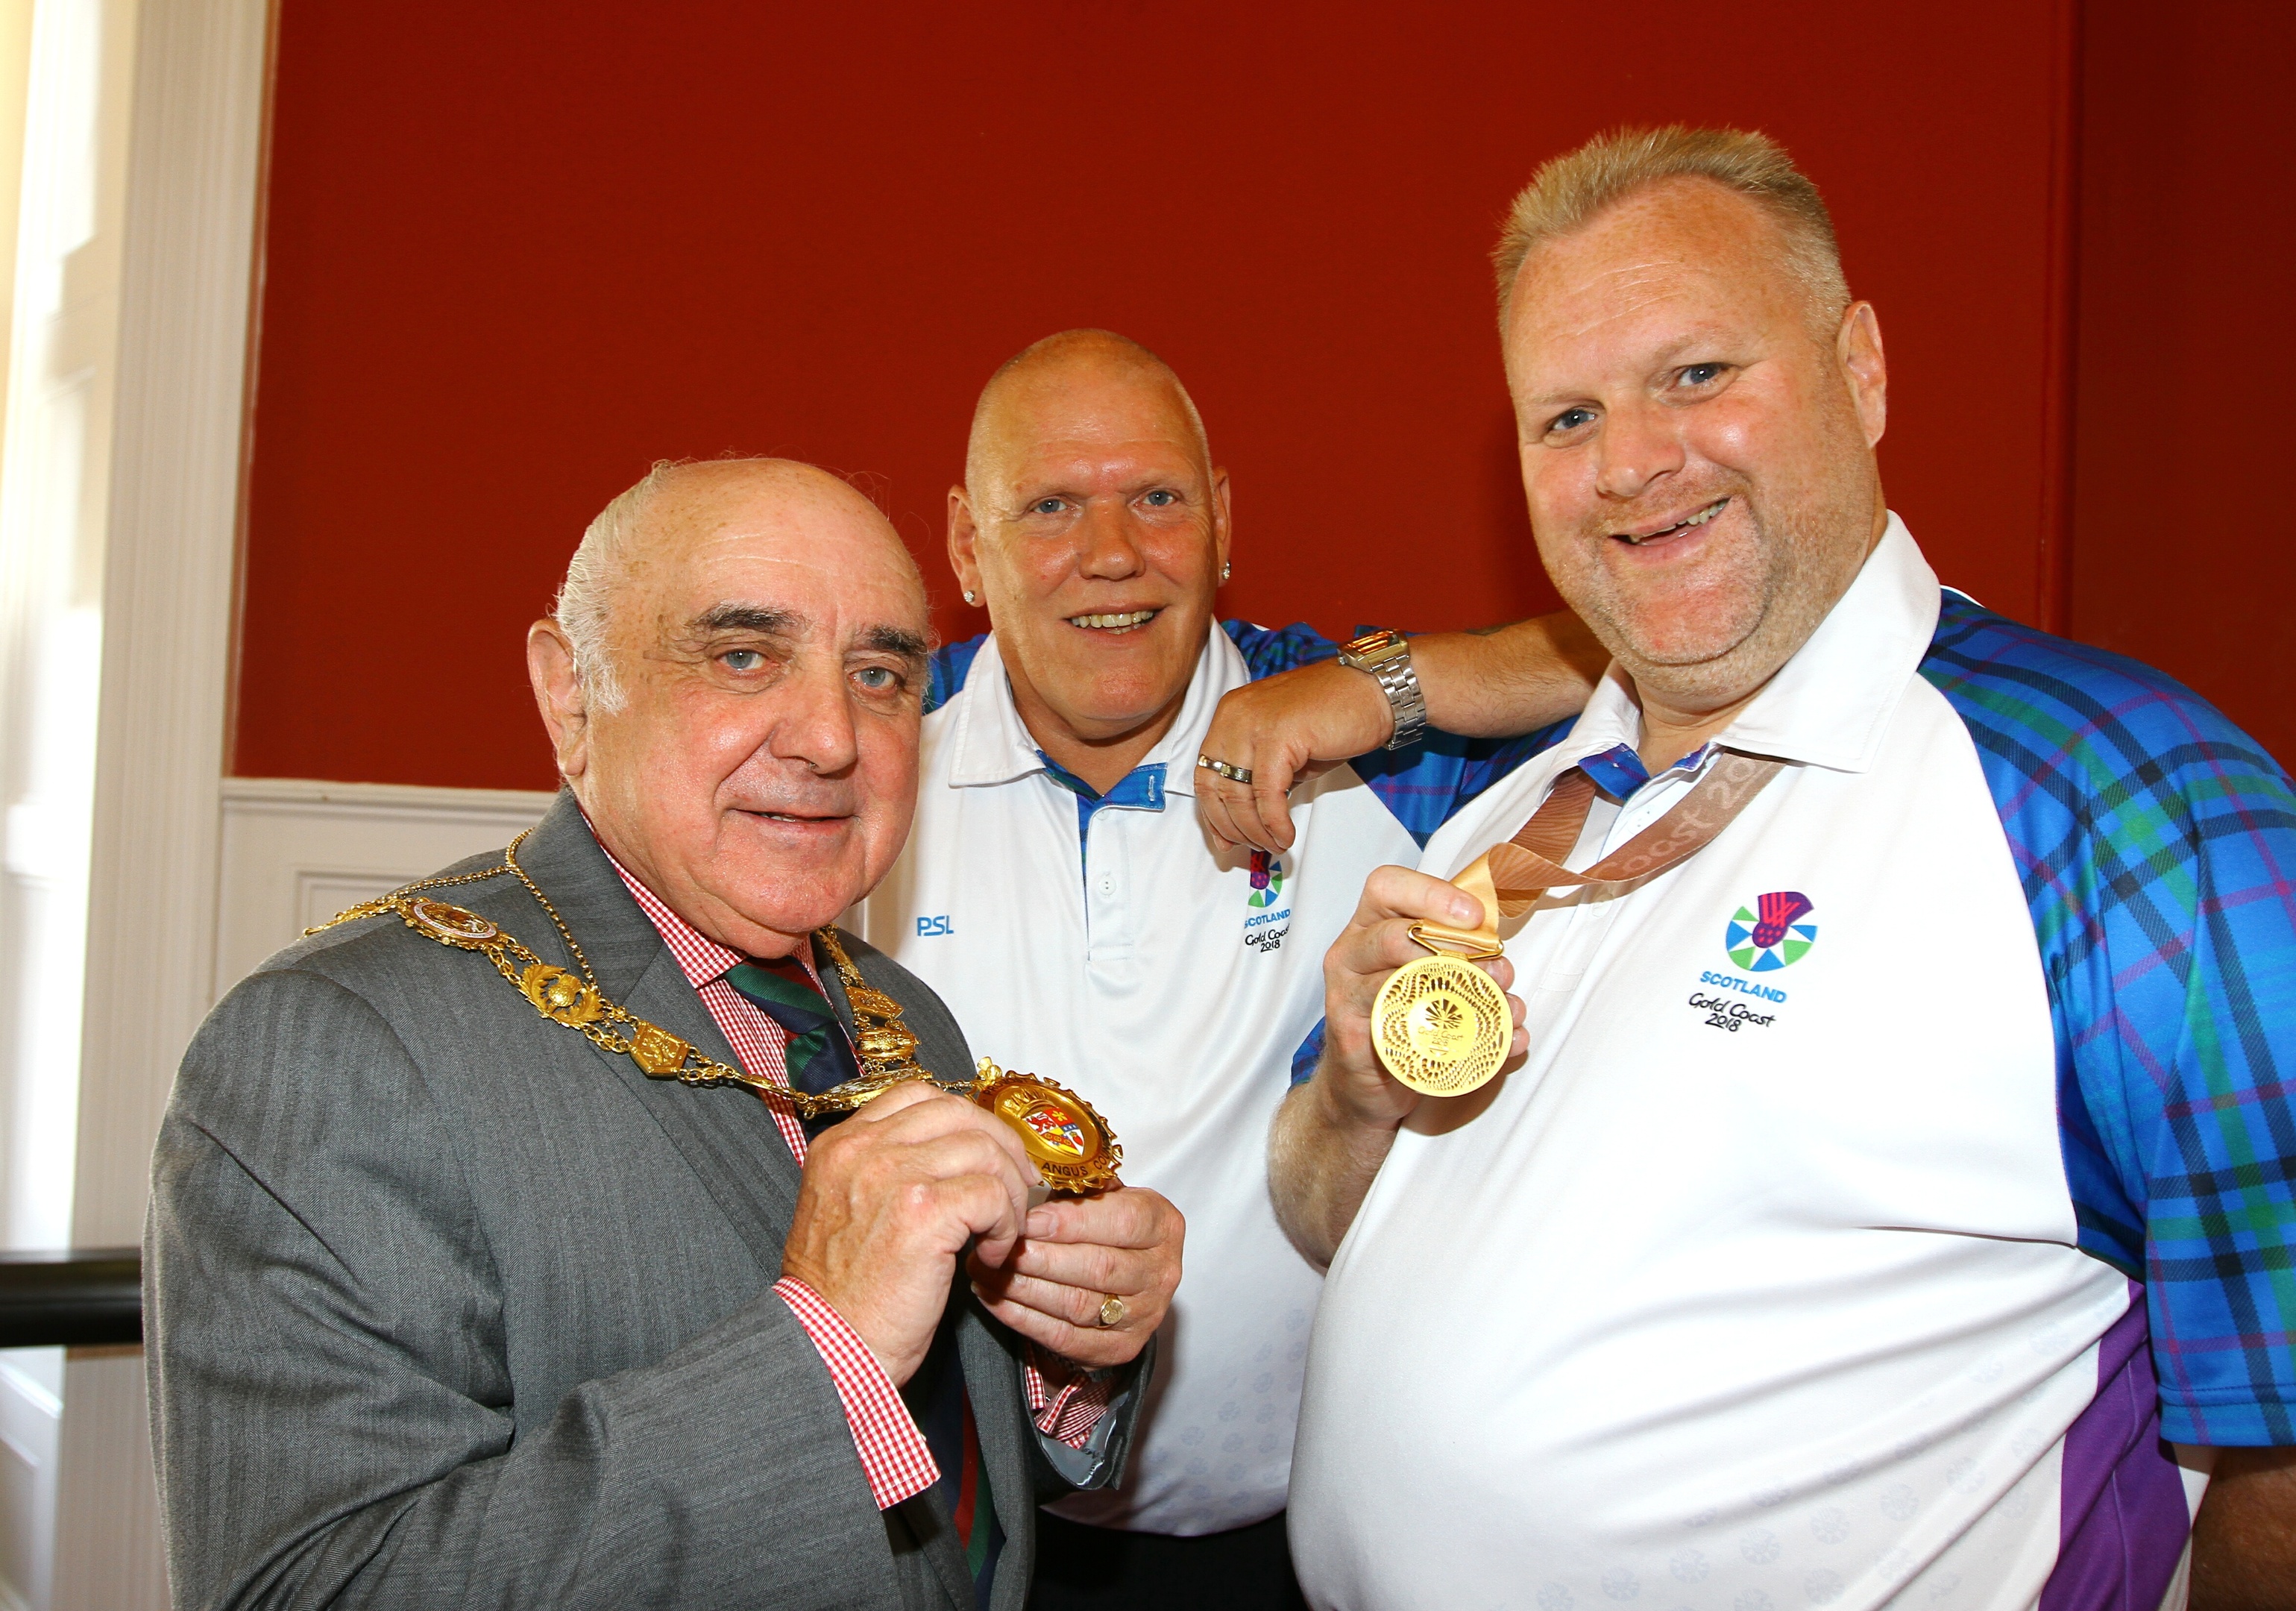 Darren Burnett (with gold medal) and Mike Mike Nicoll meet provost Ronnie Proctor.